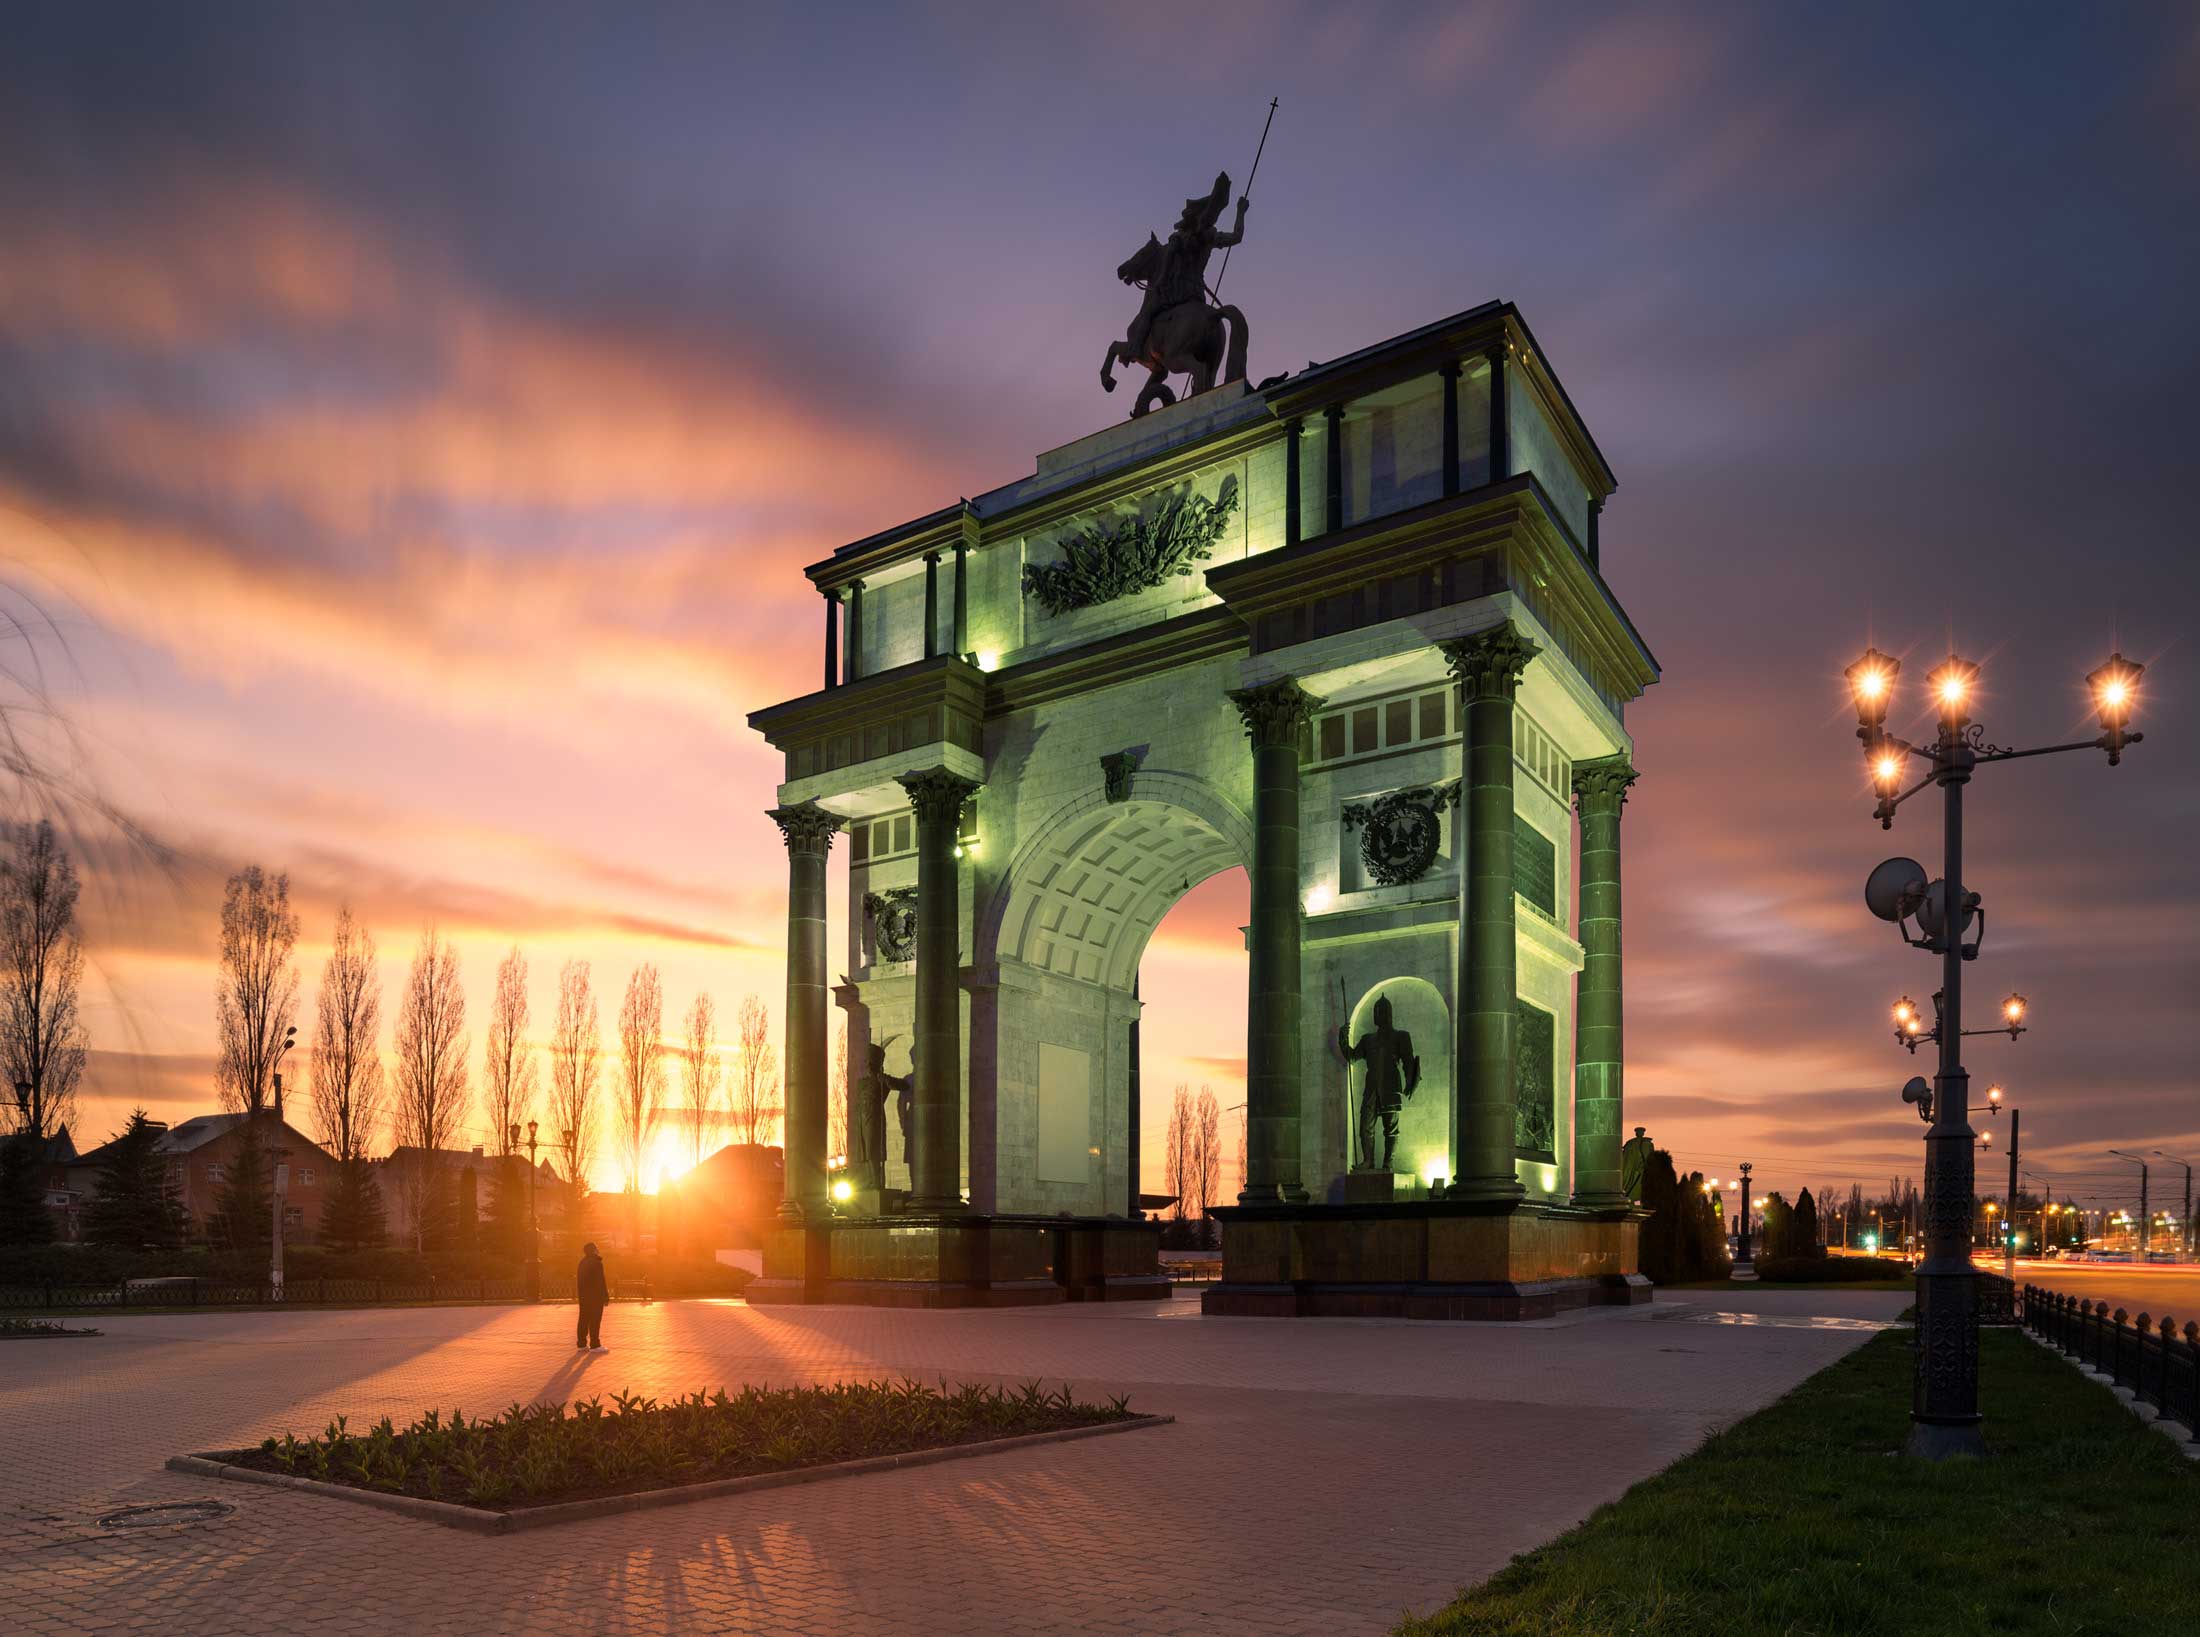 Man in a beam of light staring up at an elaborate arch with a horse and rider statue atop it, Kursk, Russia